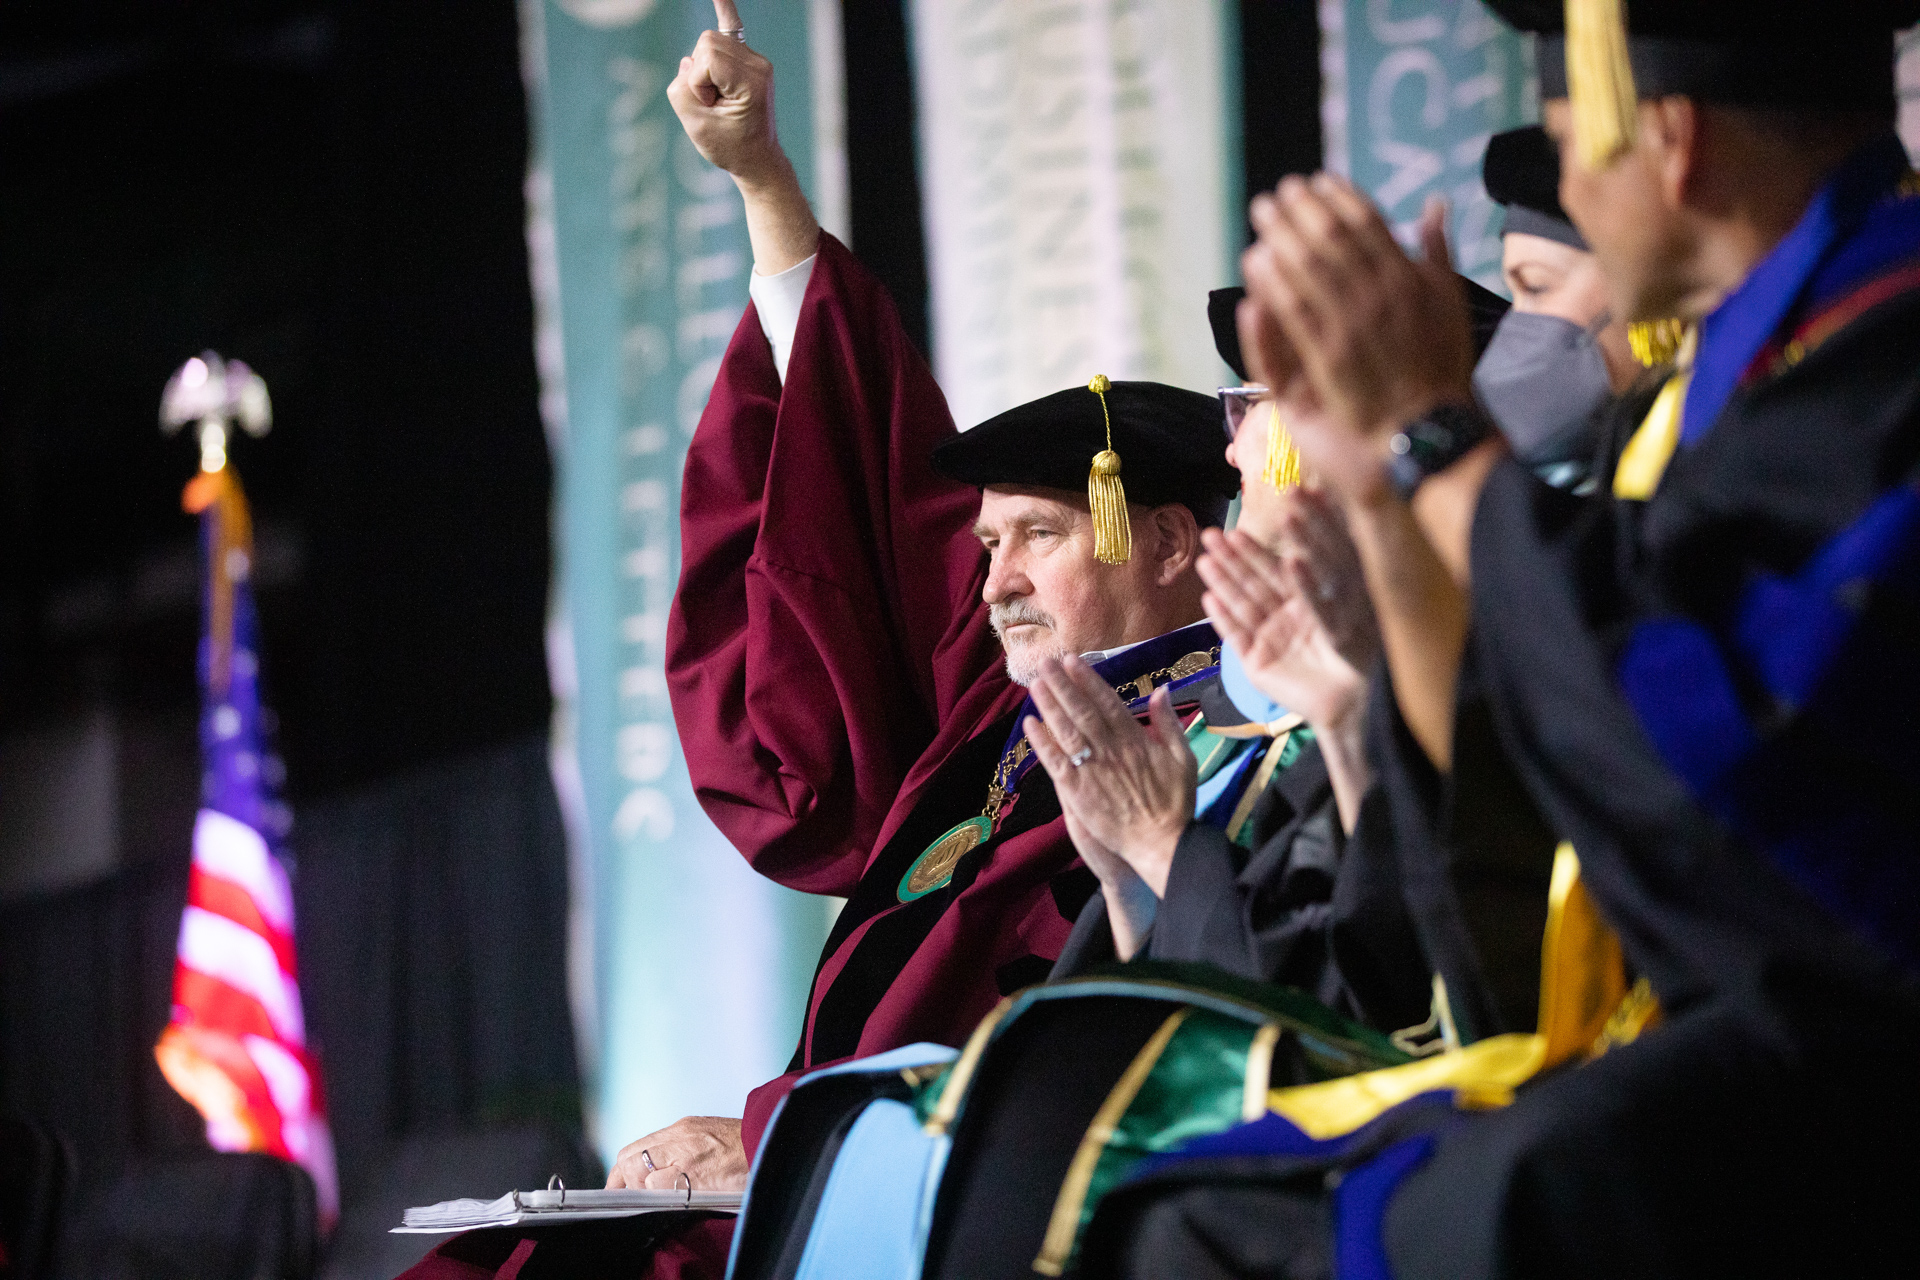 President Robert S. Nelsen, at Commencement in academic regalia, giving the "stingers up" hand signal.